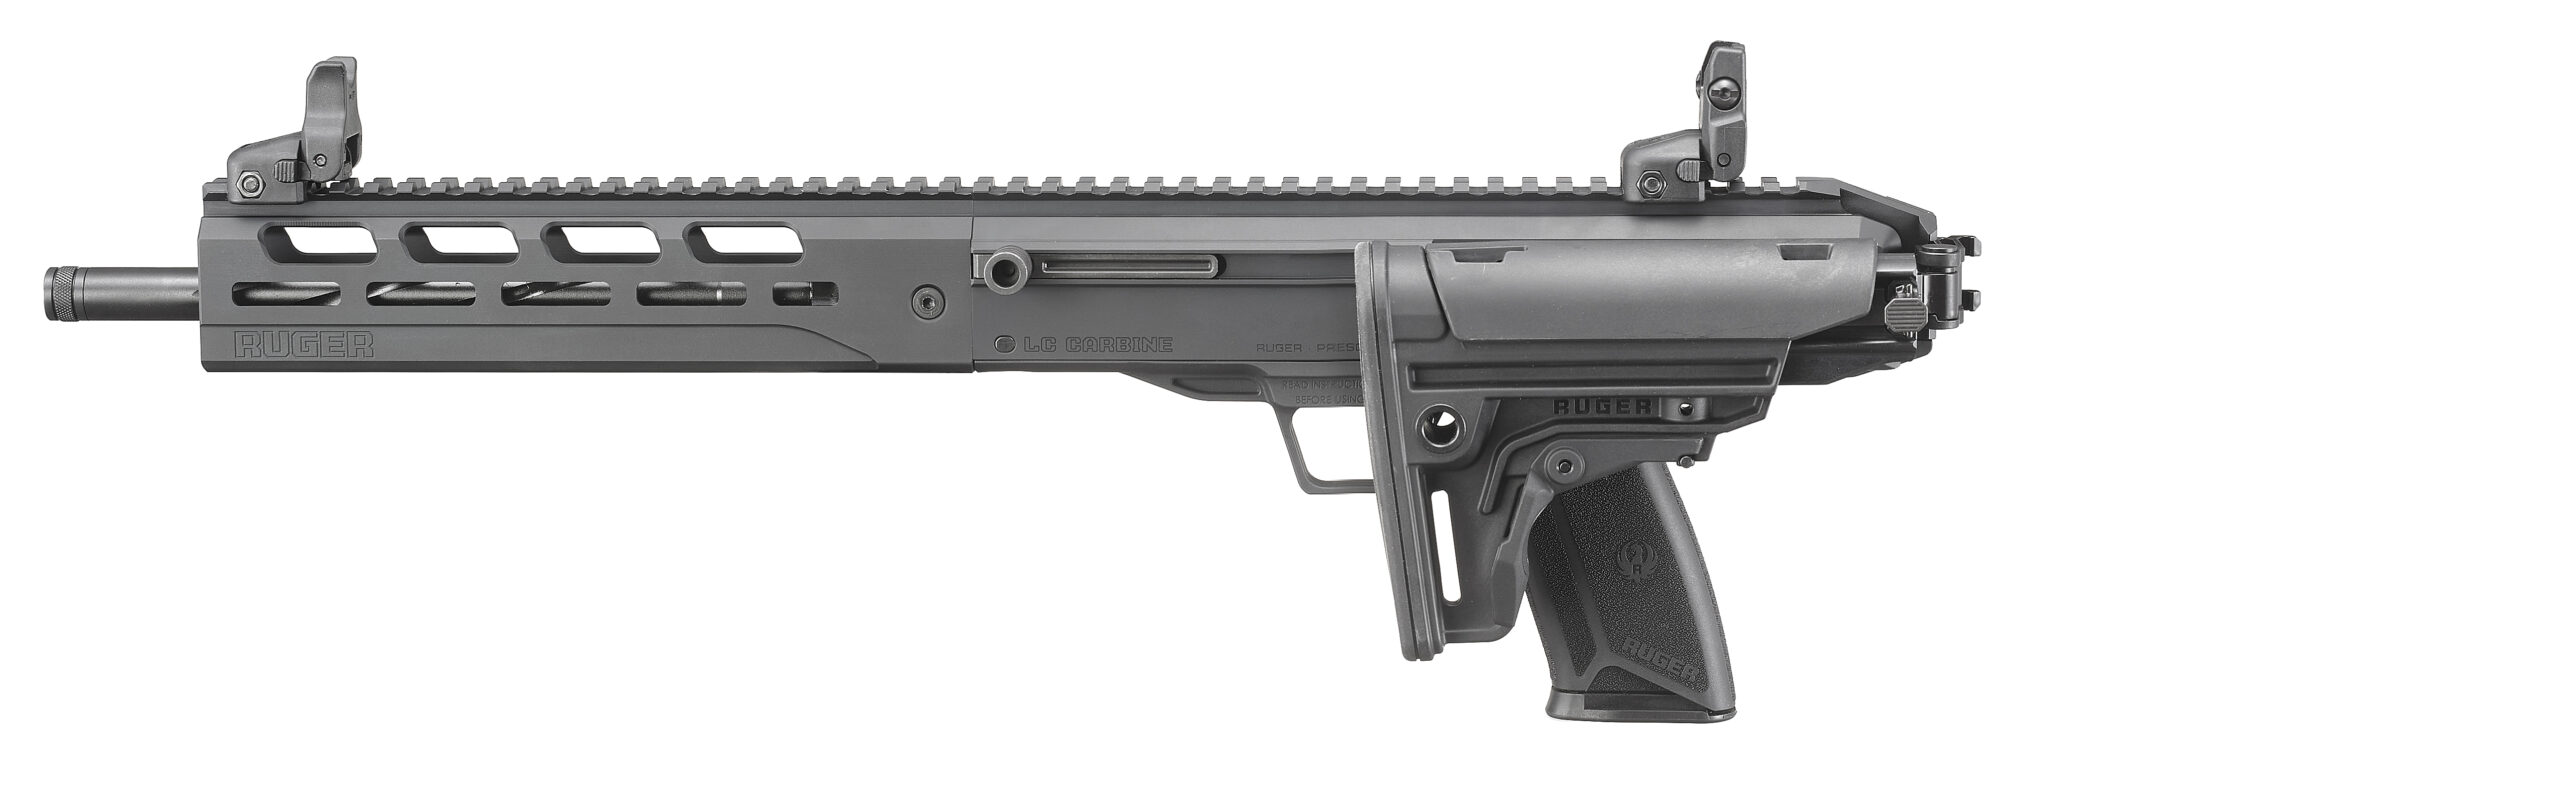 Ruger's 5.7 carbine features a left-folding stock (i.e. inboard for right handed shooters).